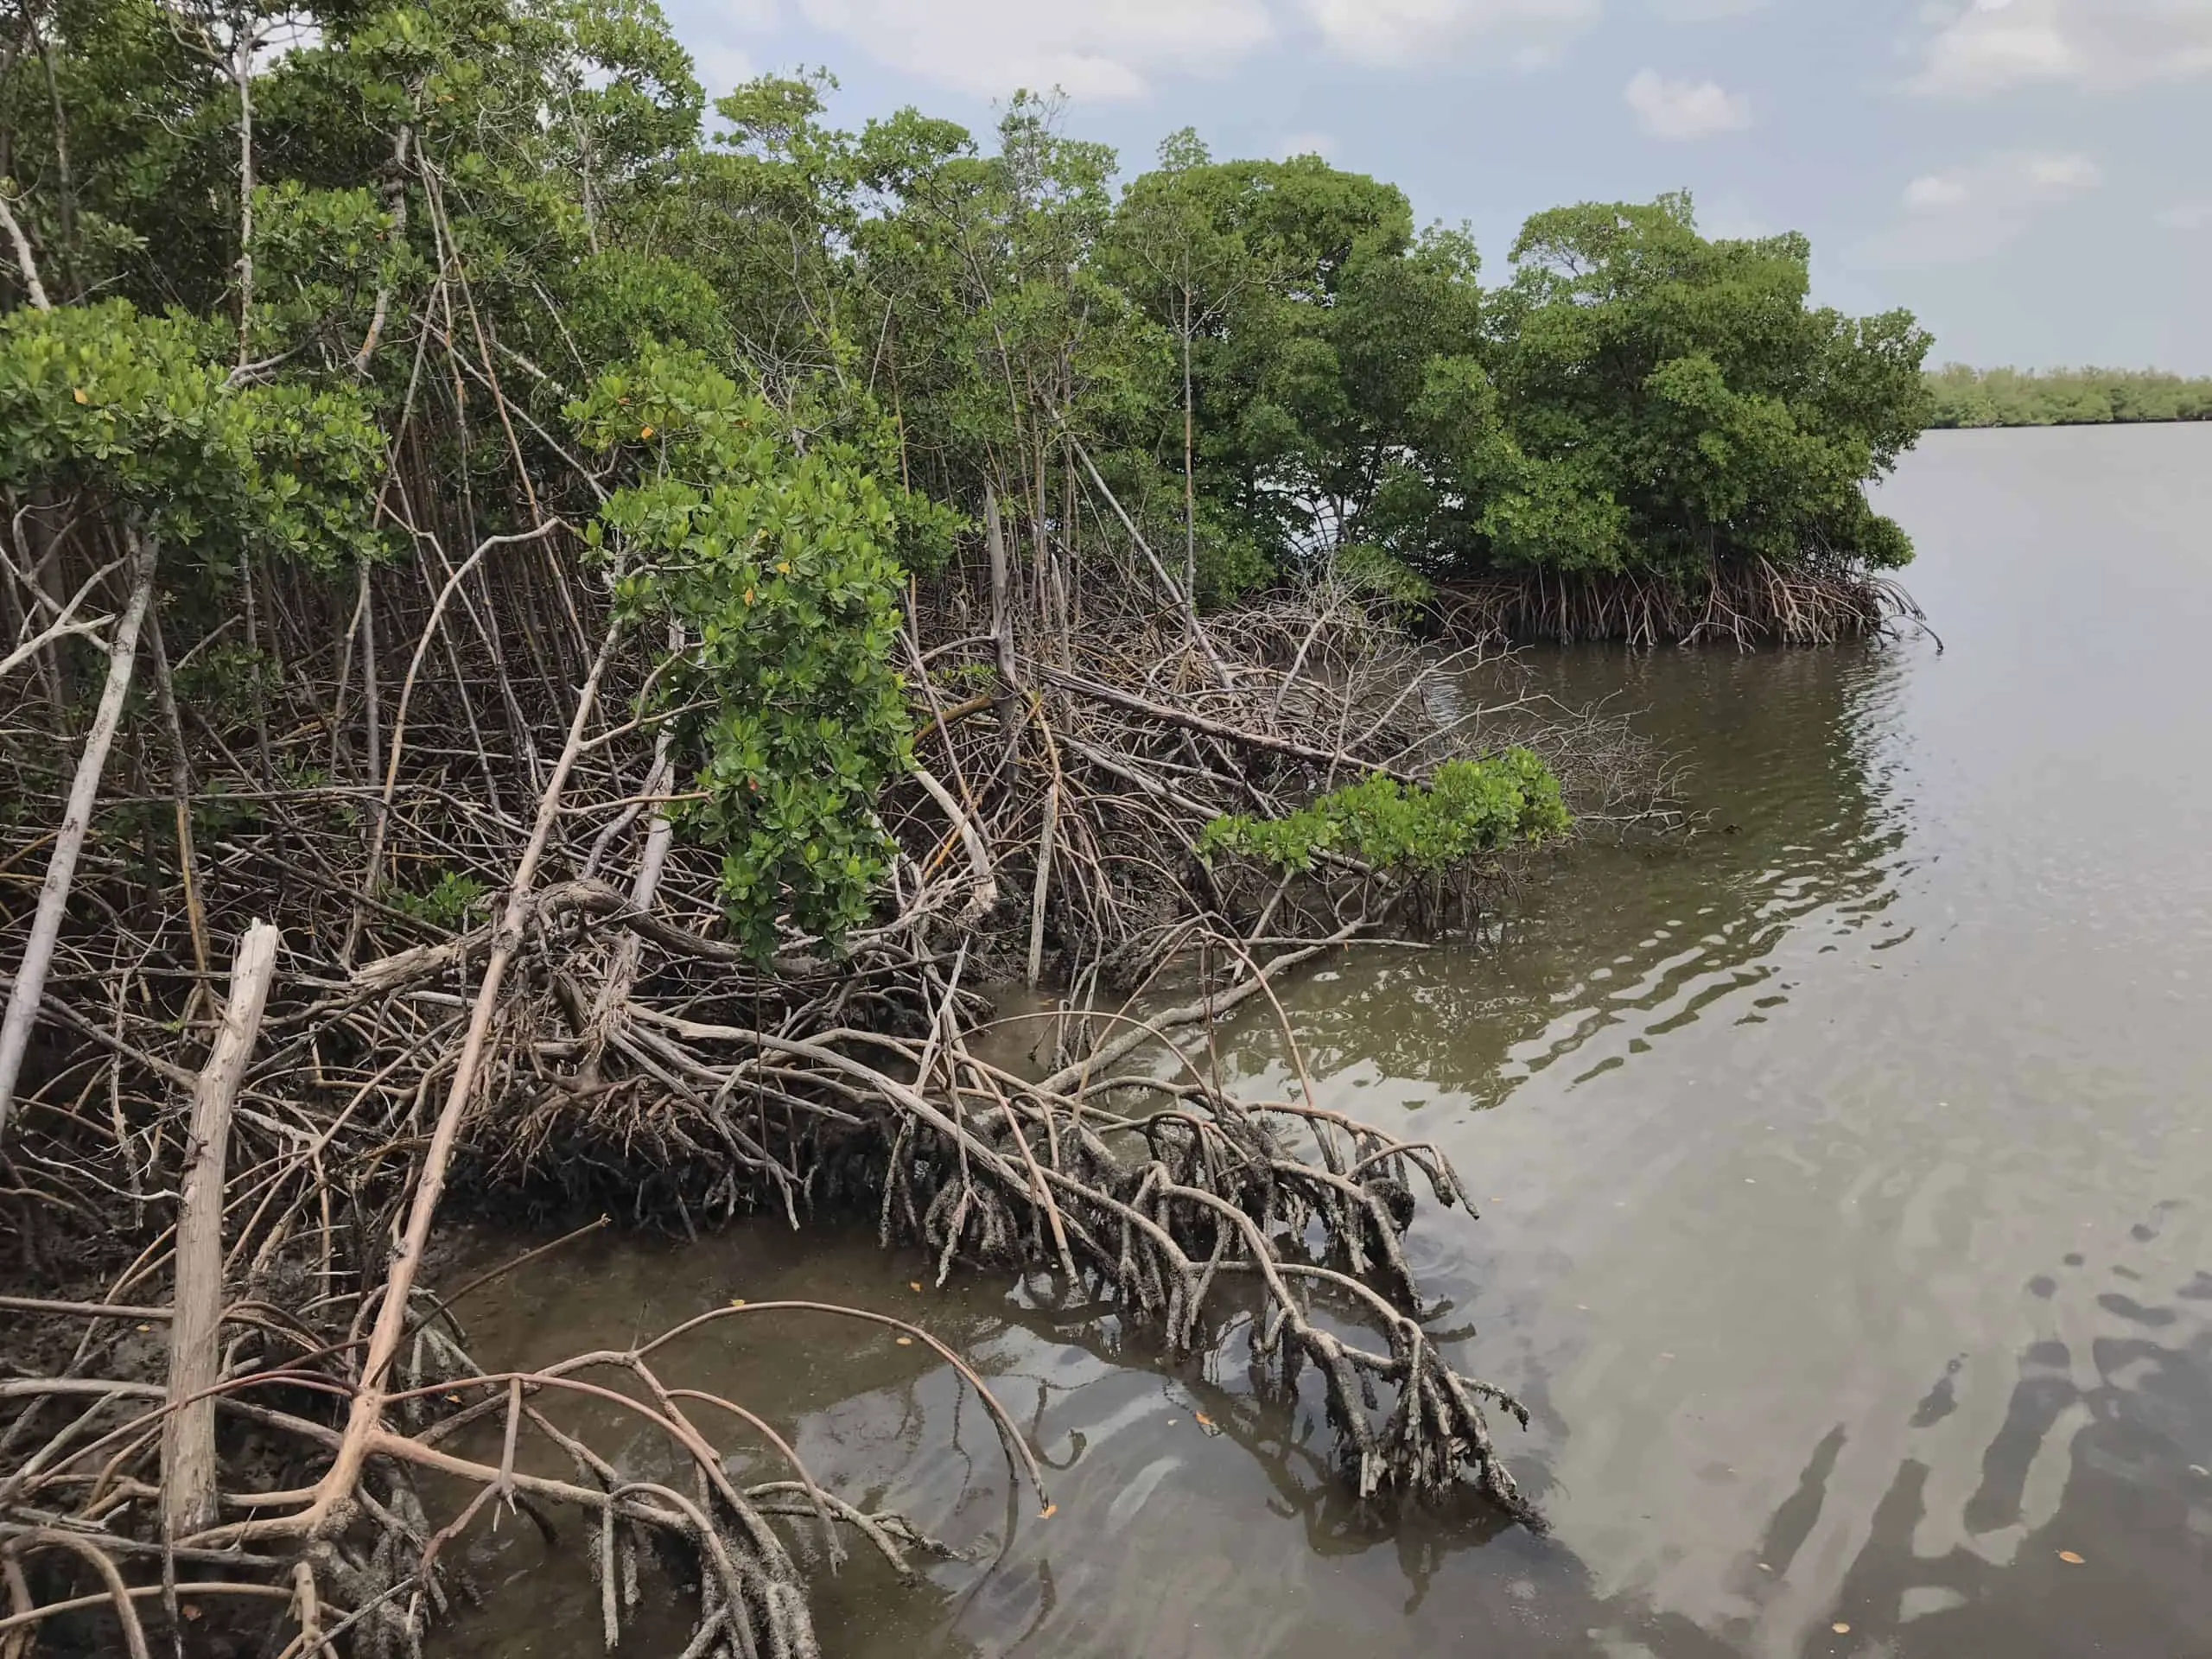 A mangrove forest. Trees with green leaves. Brown bark, with some of the roots submerged in the brackish sea. in Fort Lauderdale/Hollywood, Florida, United States. At the Anne Kolb Nature Center.